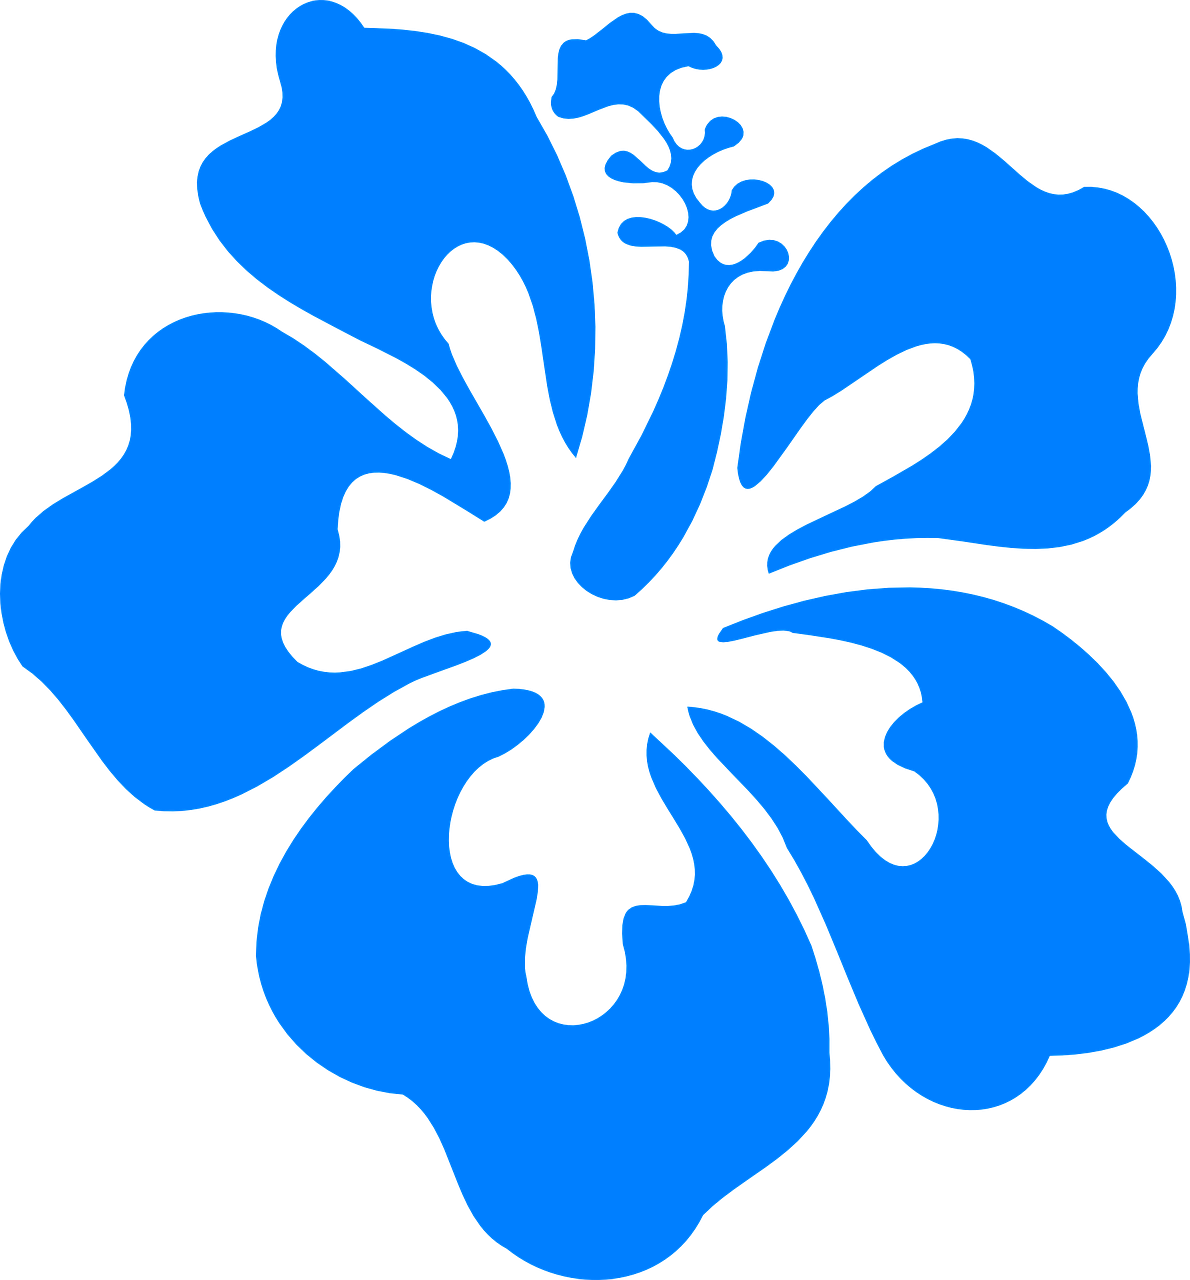 A Blue Flower With Black Background